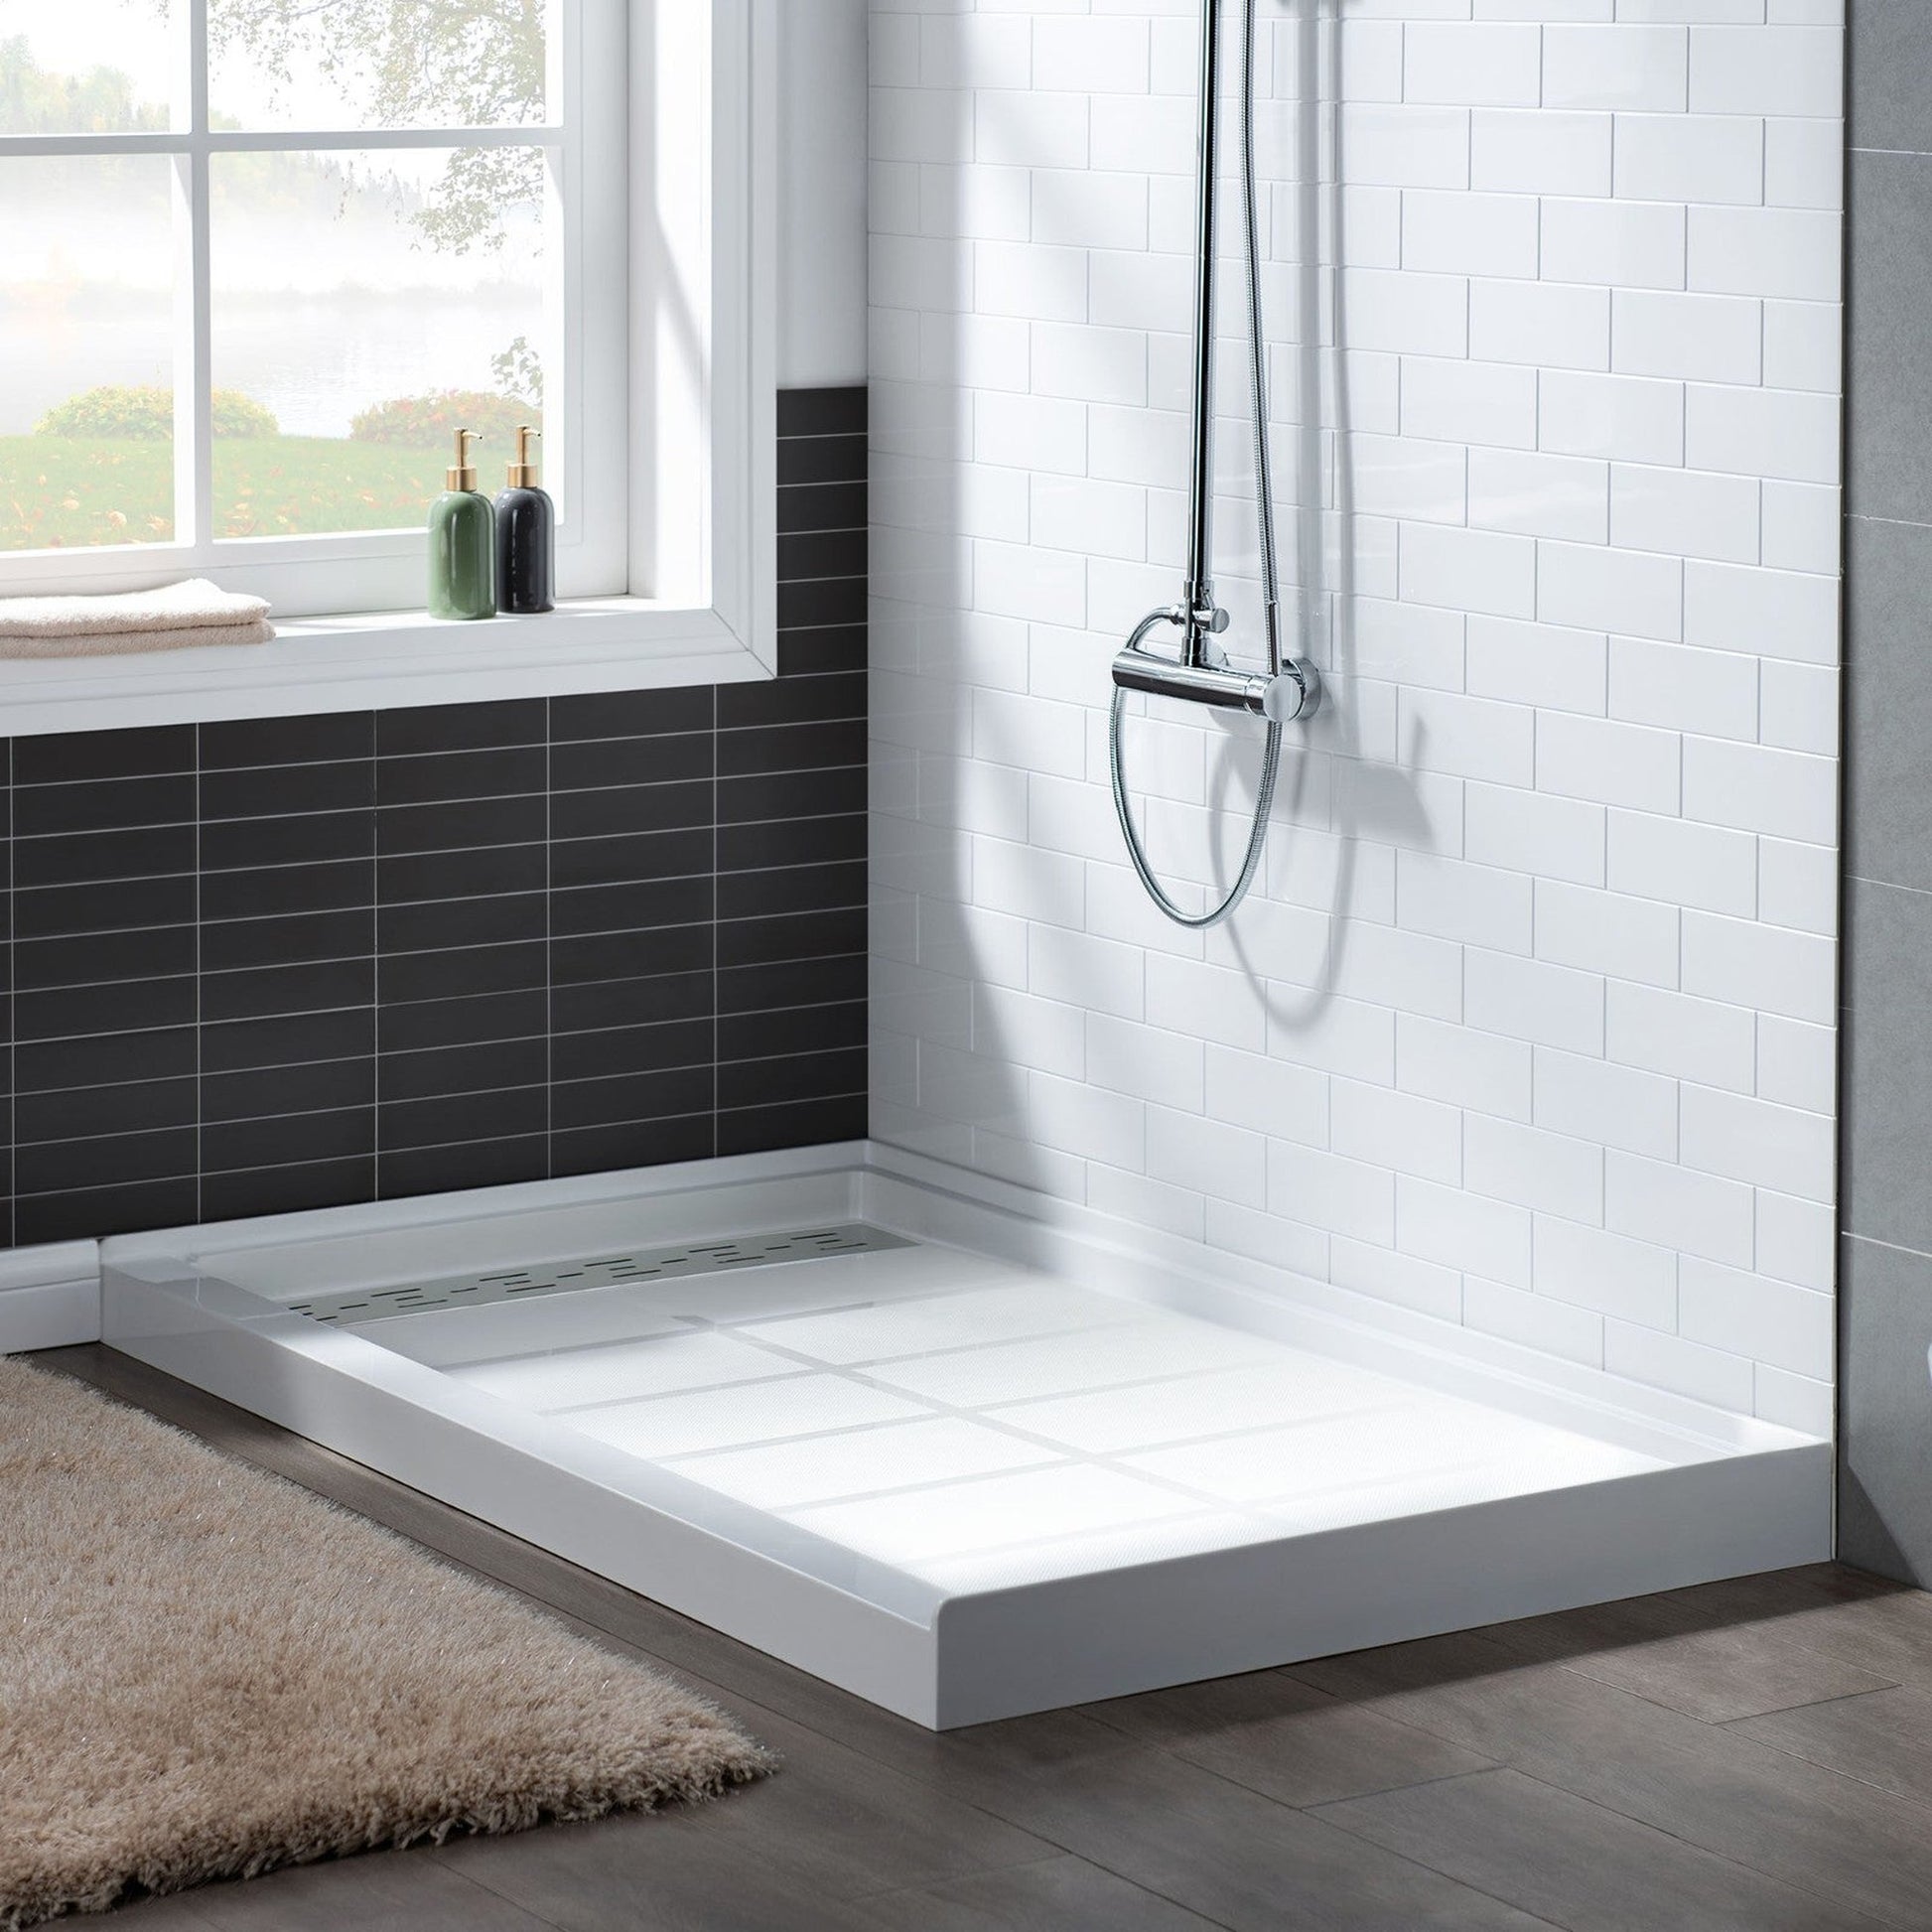 WoodBridge 60" x 36" White Solid Surface Shower Base Left Drain Location With Brushed Nickel Trench Drain Cover